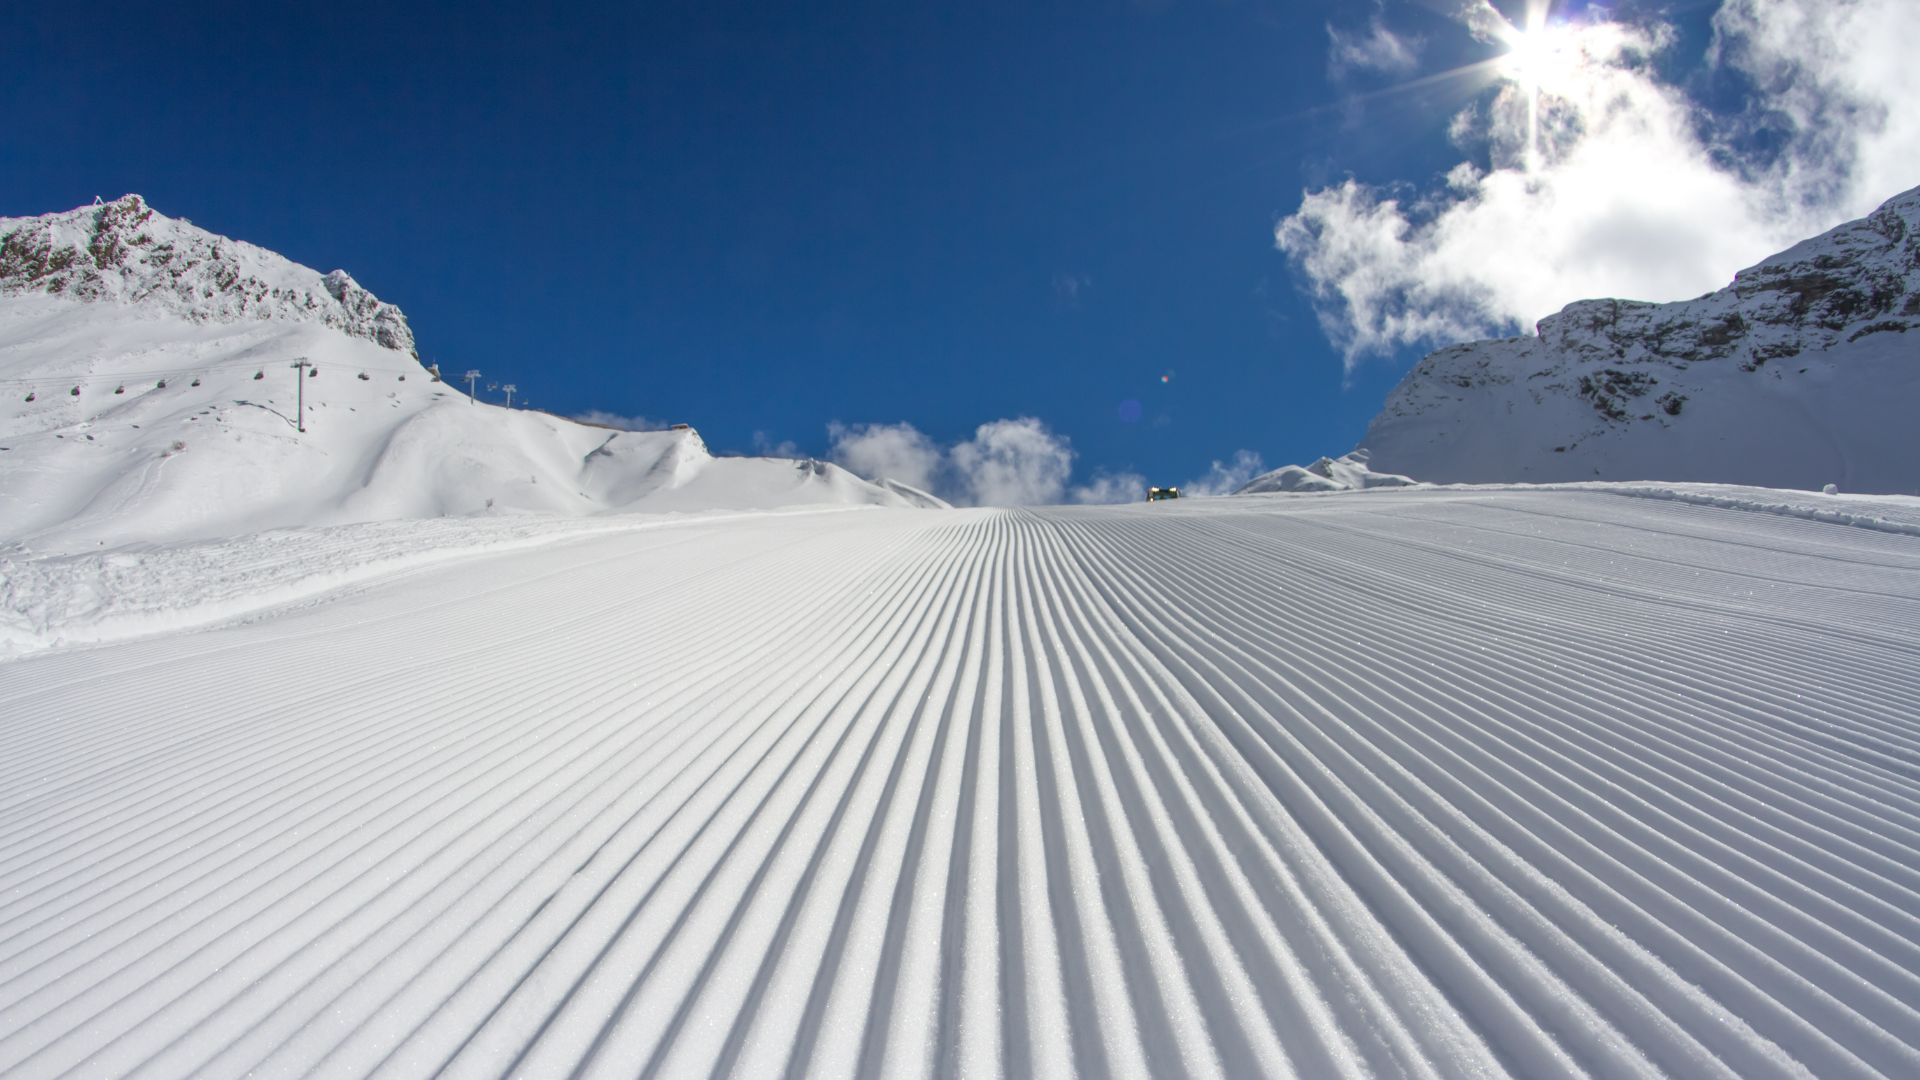 photo of a skii slope